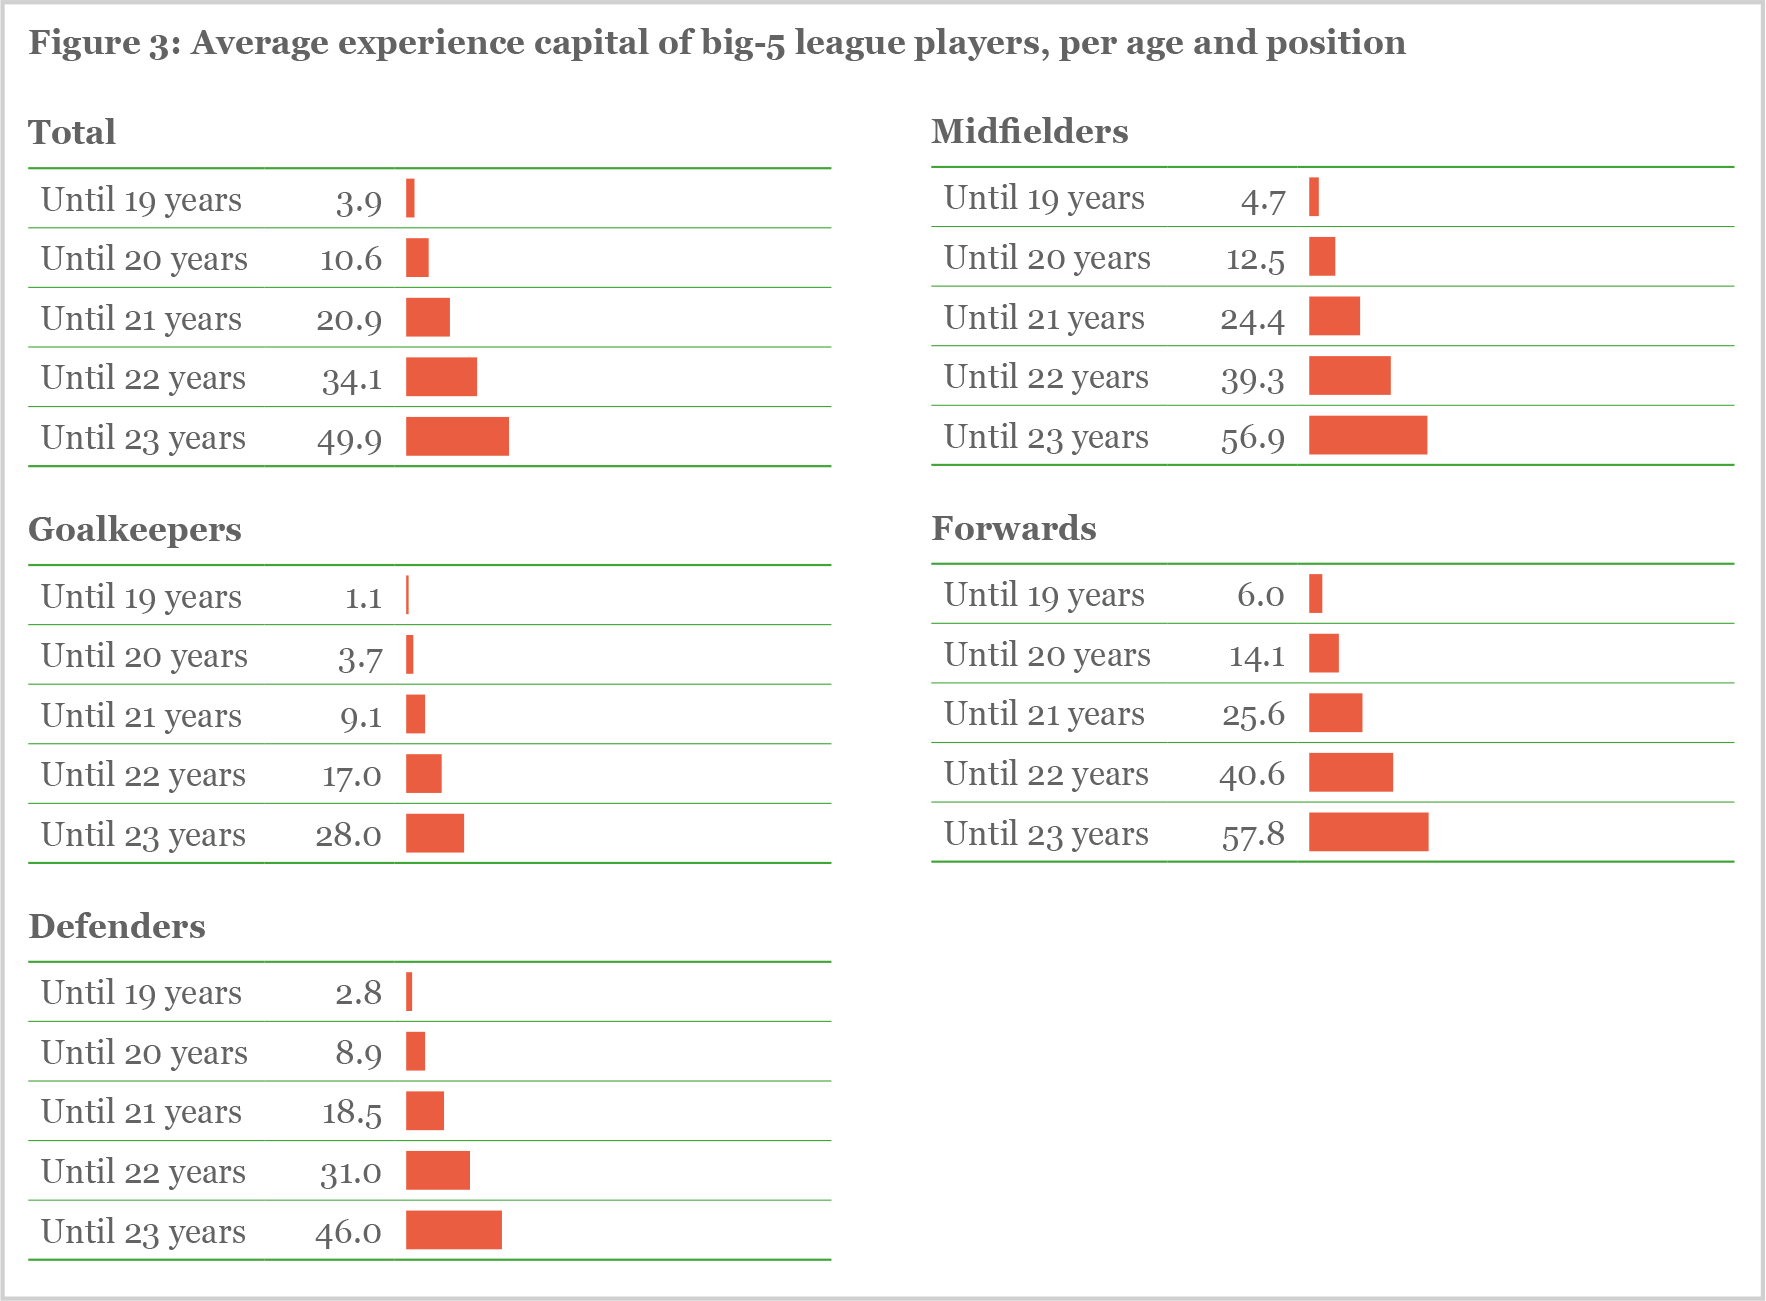 Figure 3: Average experience capital of big-5 league players, per age and position